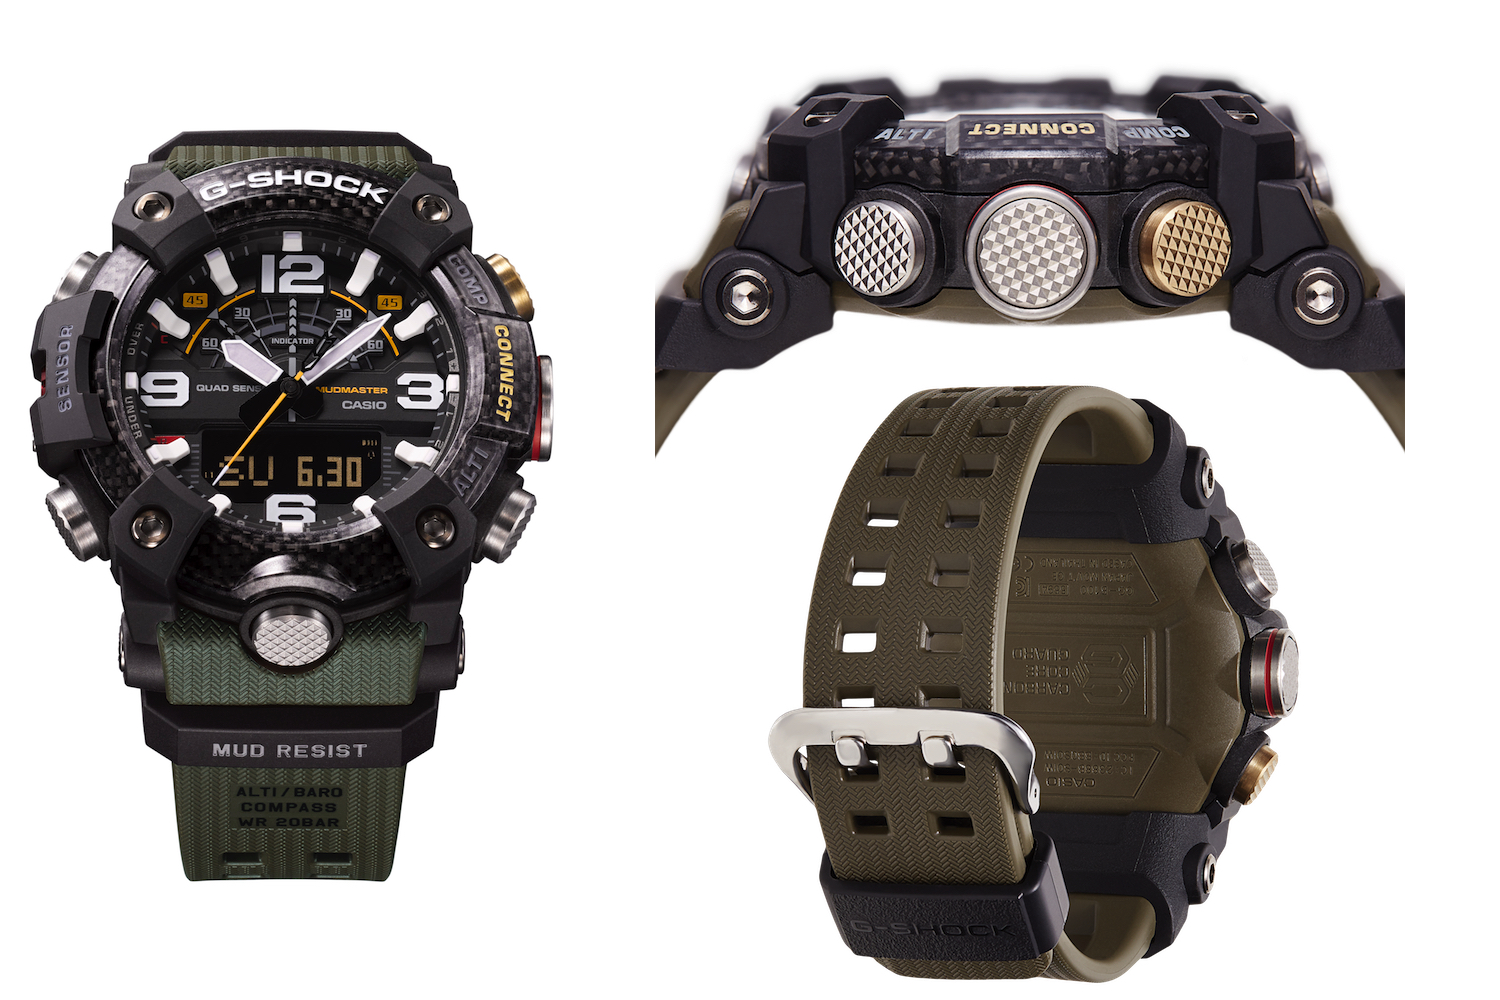 Casio G-Shock Mudmaster GG-B100 Watch Review: Full Of Style, Value,  Features